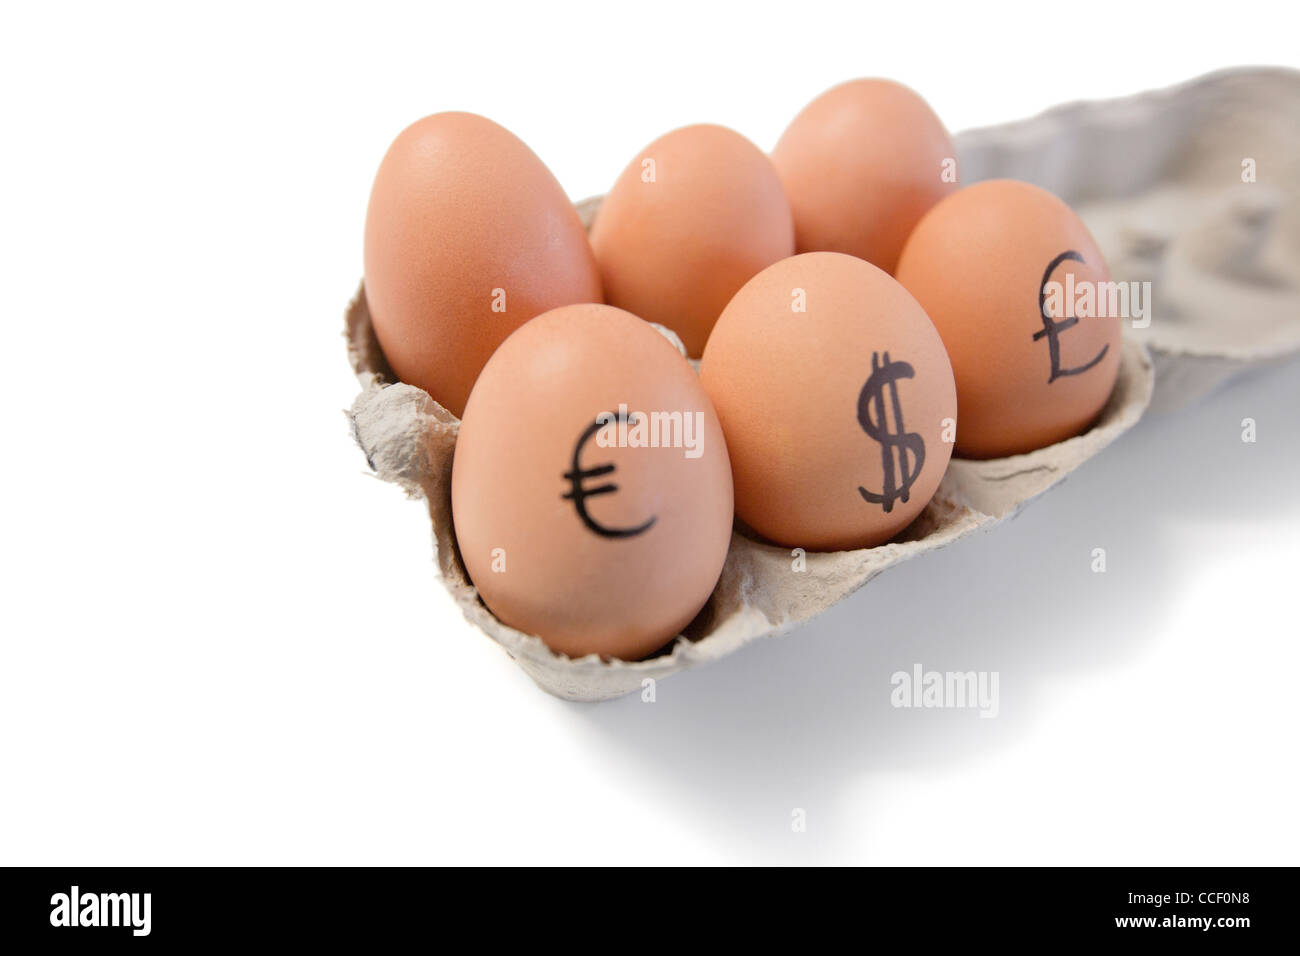 Eggs with currency symbols on it Stock Photo